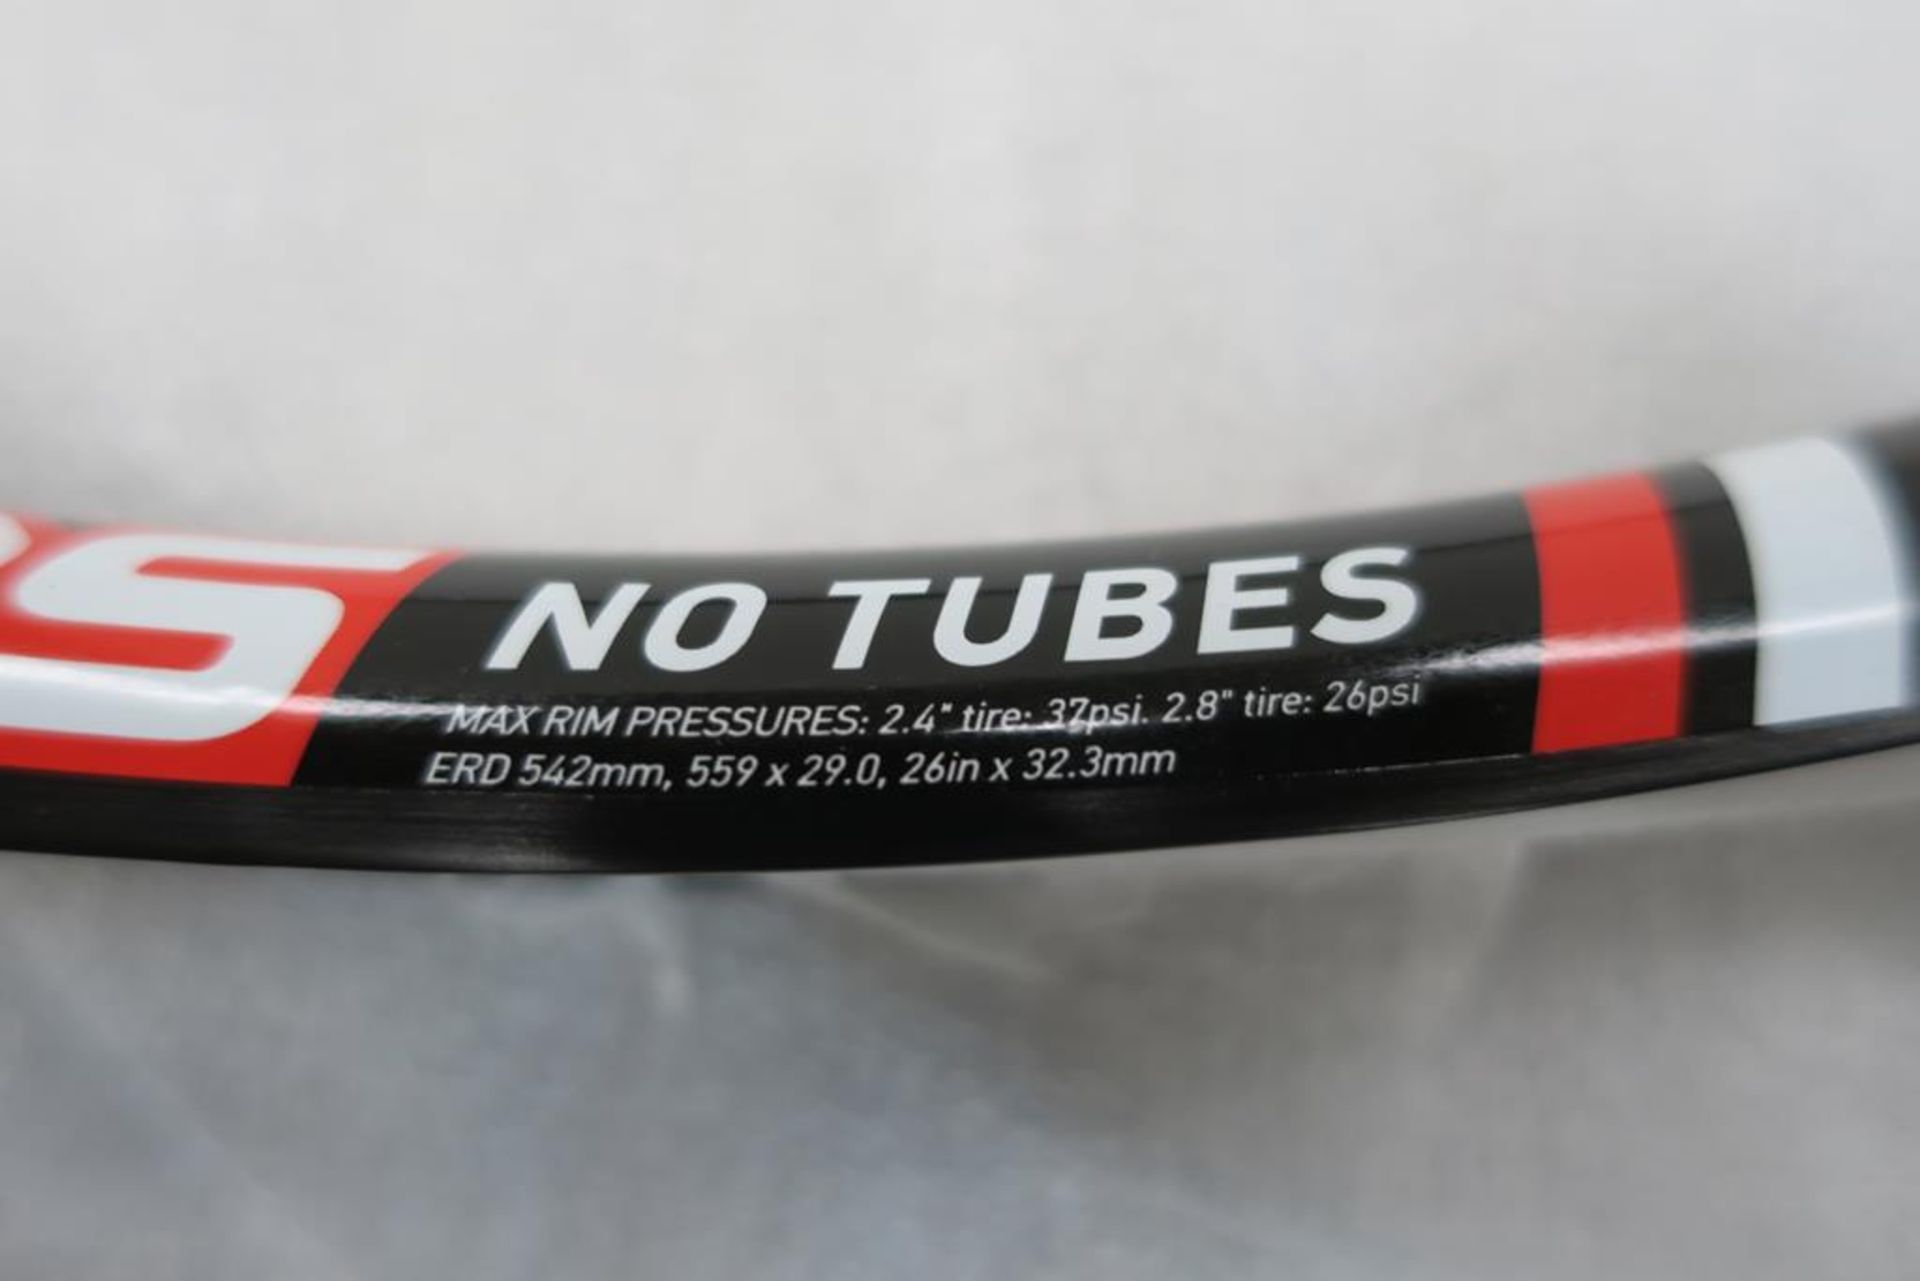 A New Stans No Tubes ZTR Flow MK3 Rim (559 x 29.0, 26 inch x 32.3mm) - Image 6 of 6